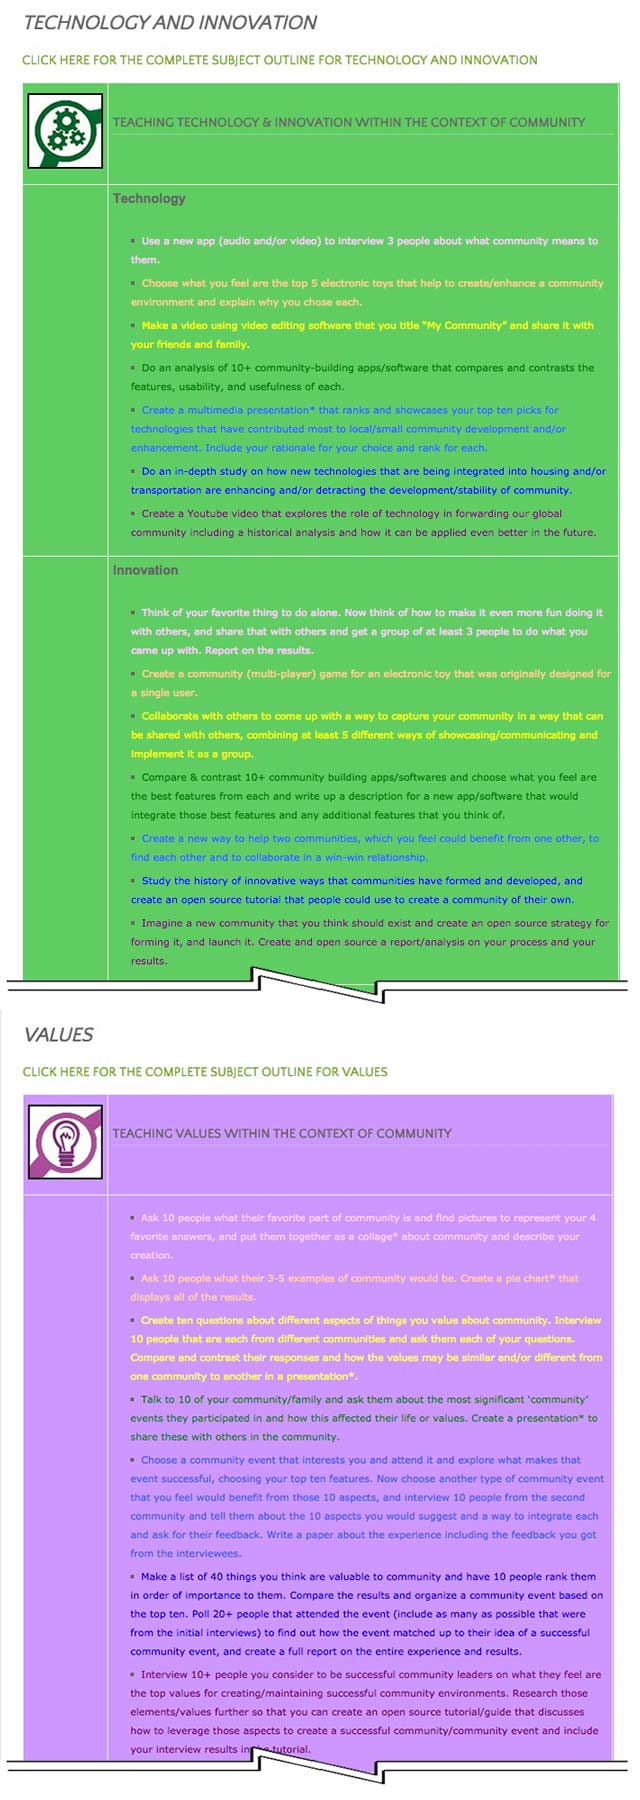 This last week the core team transferred the final 25% of the written content for the Community Lesson Plan to the website, as you see here. This lesson plan is purposed to teach all subjects, to all learning levels, in any learning environment, using the central theme of “Community” and it is now 100% complete on the website.